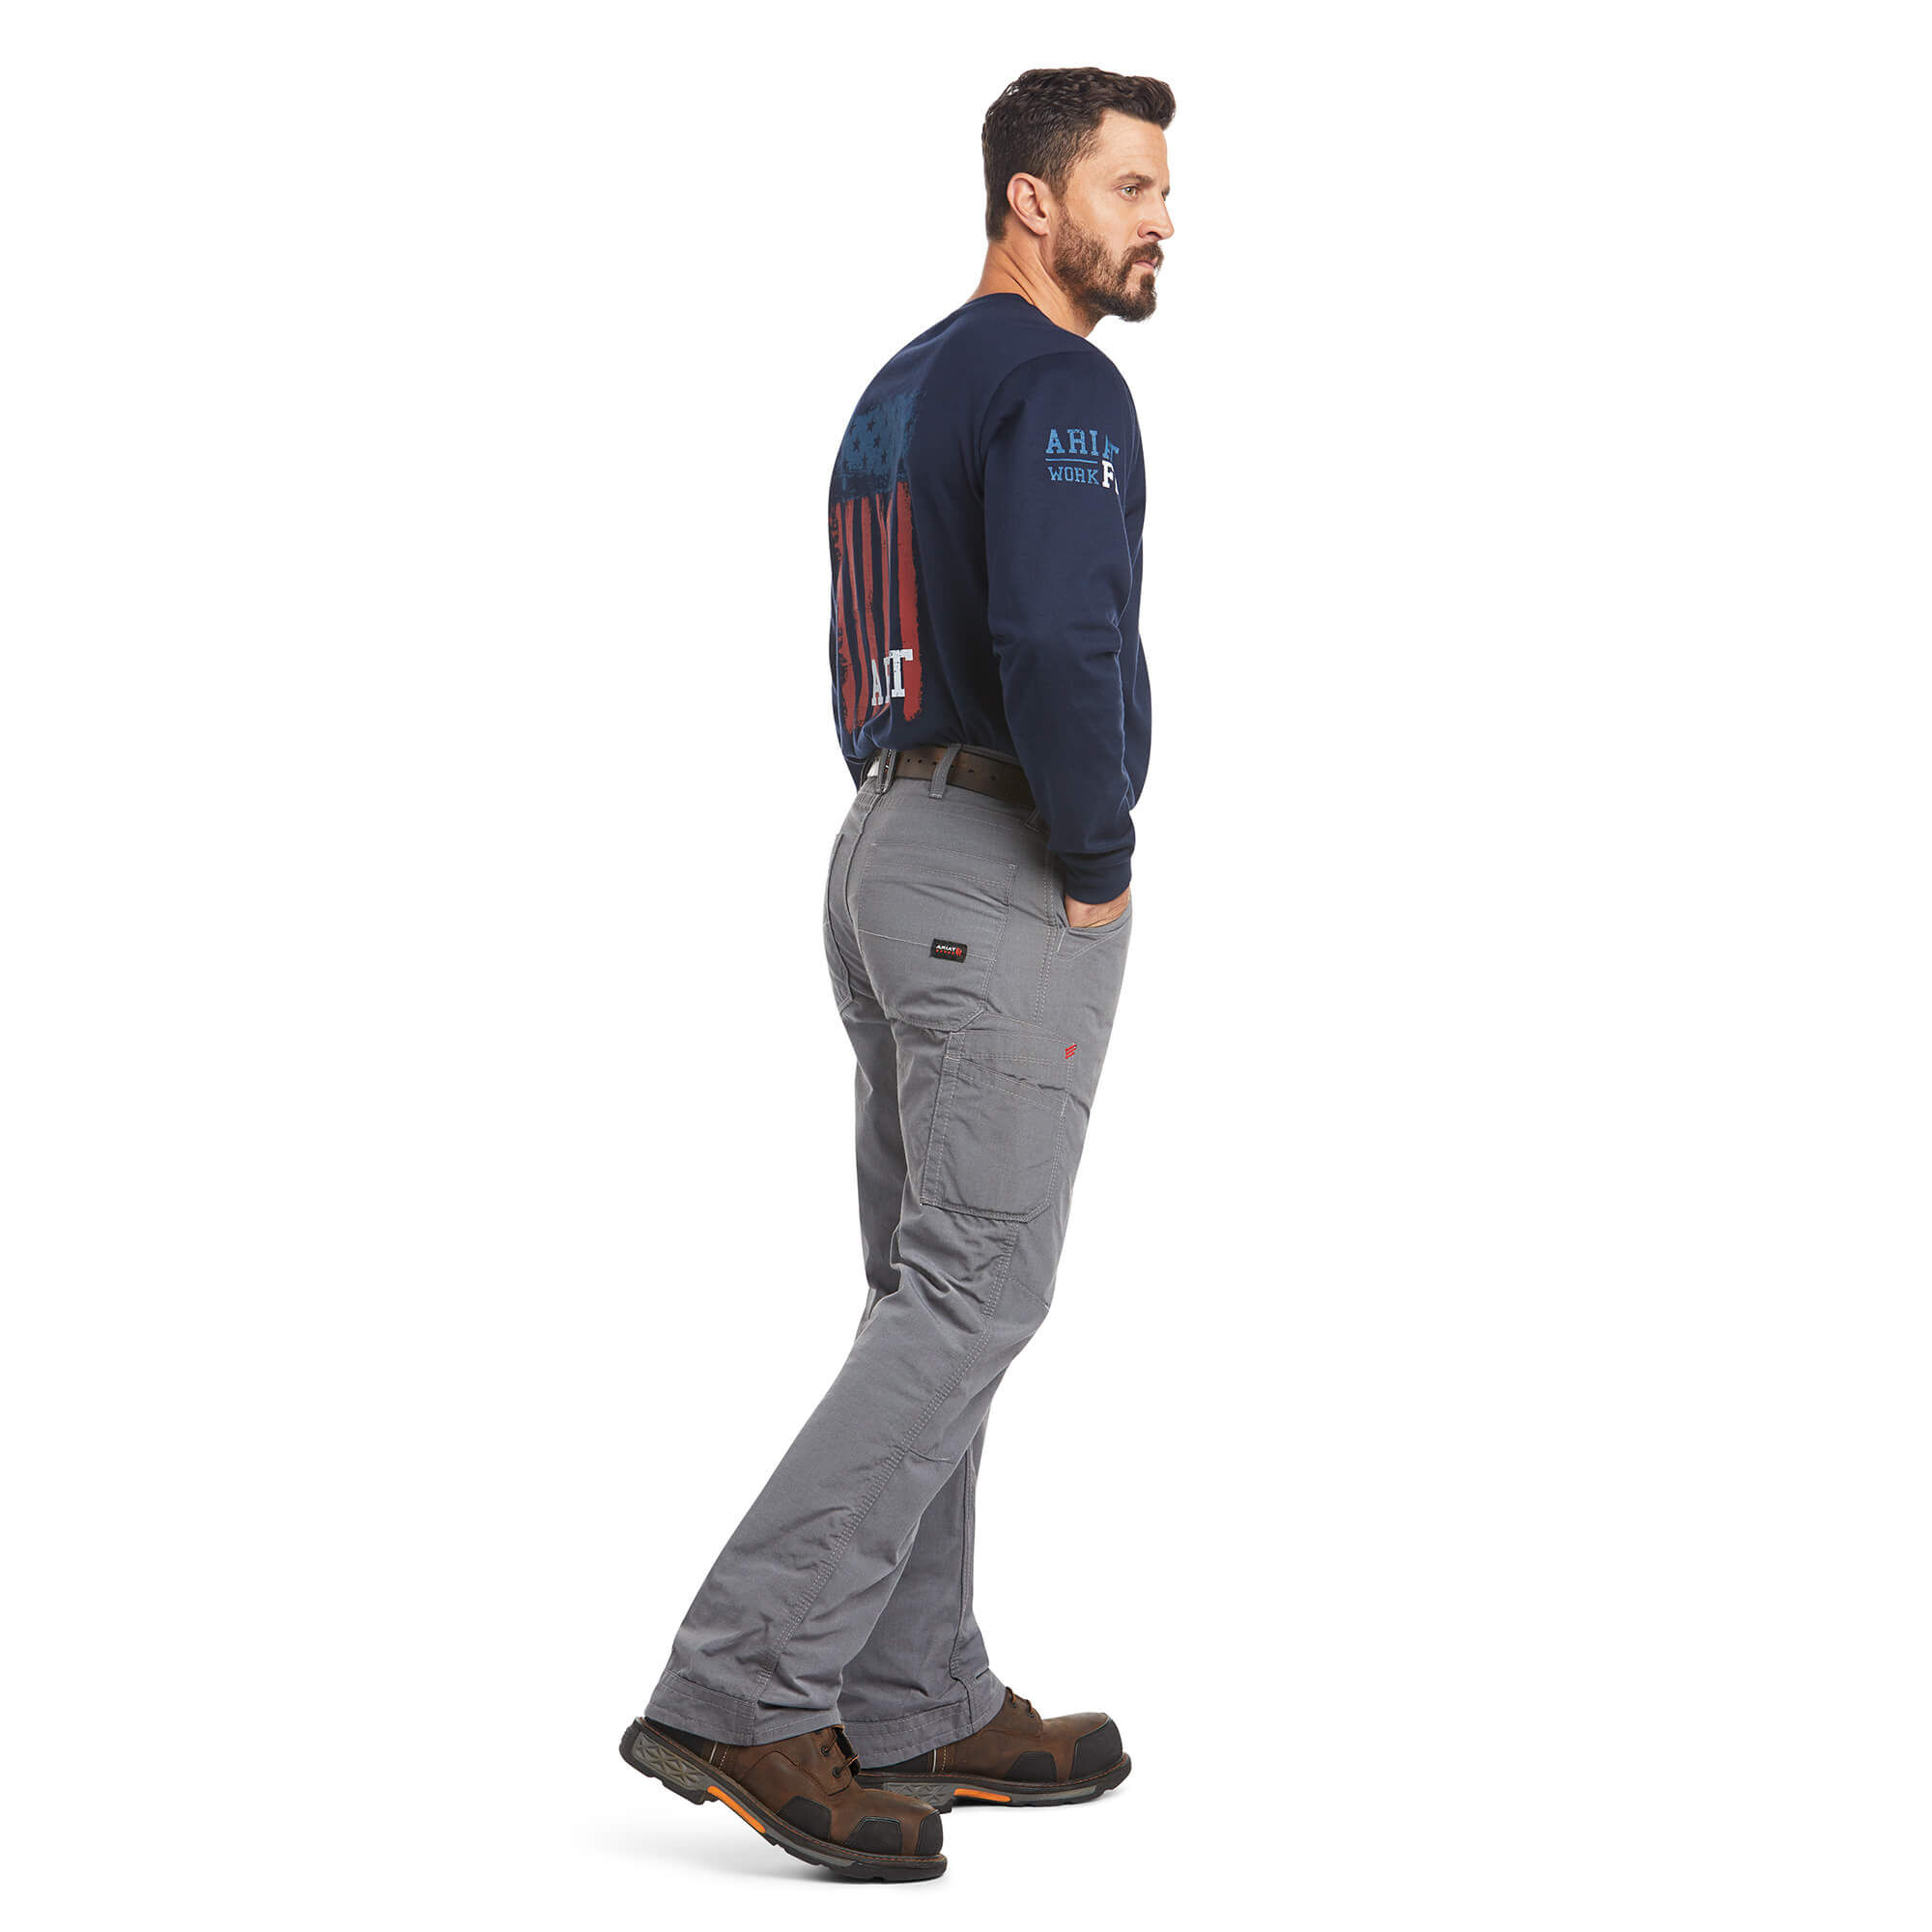 Men's Wyoming Relaxed Fit Ripstop Cargo Pant